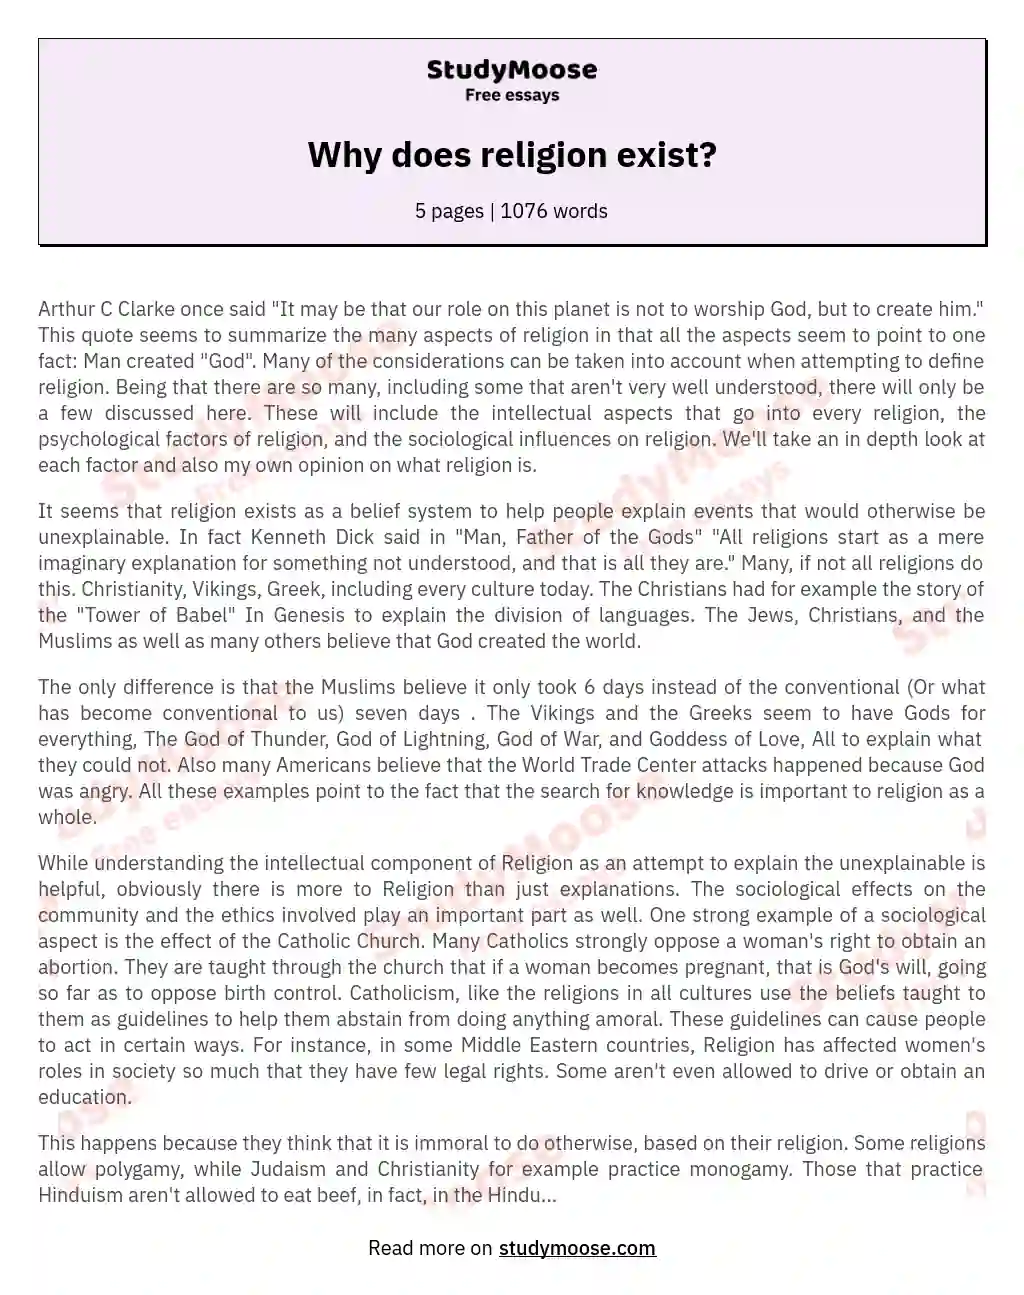 The Concept of Religion: Exploring its Intellectual, Sociological, and Psychological Aspects essay